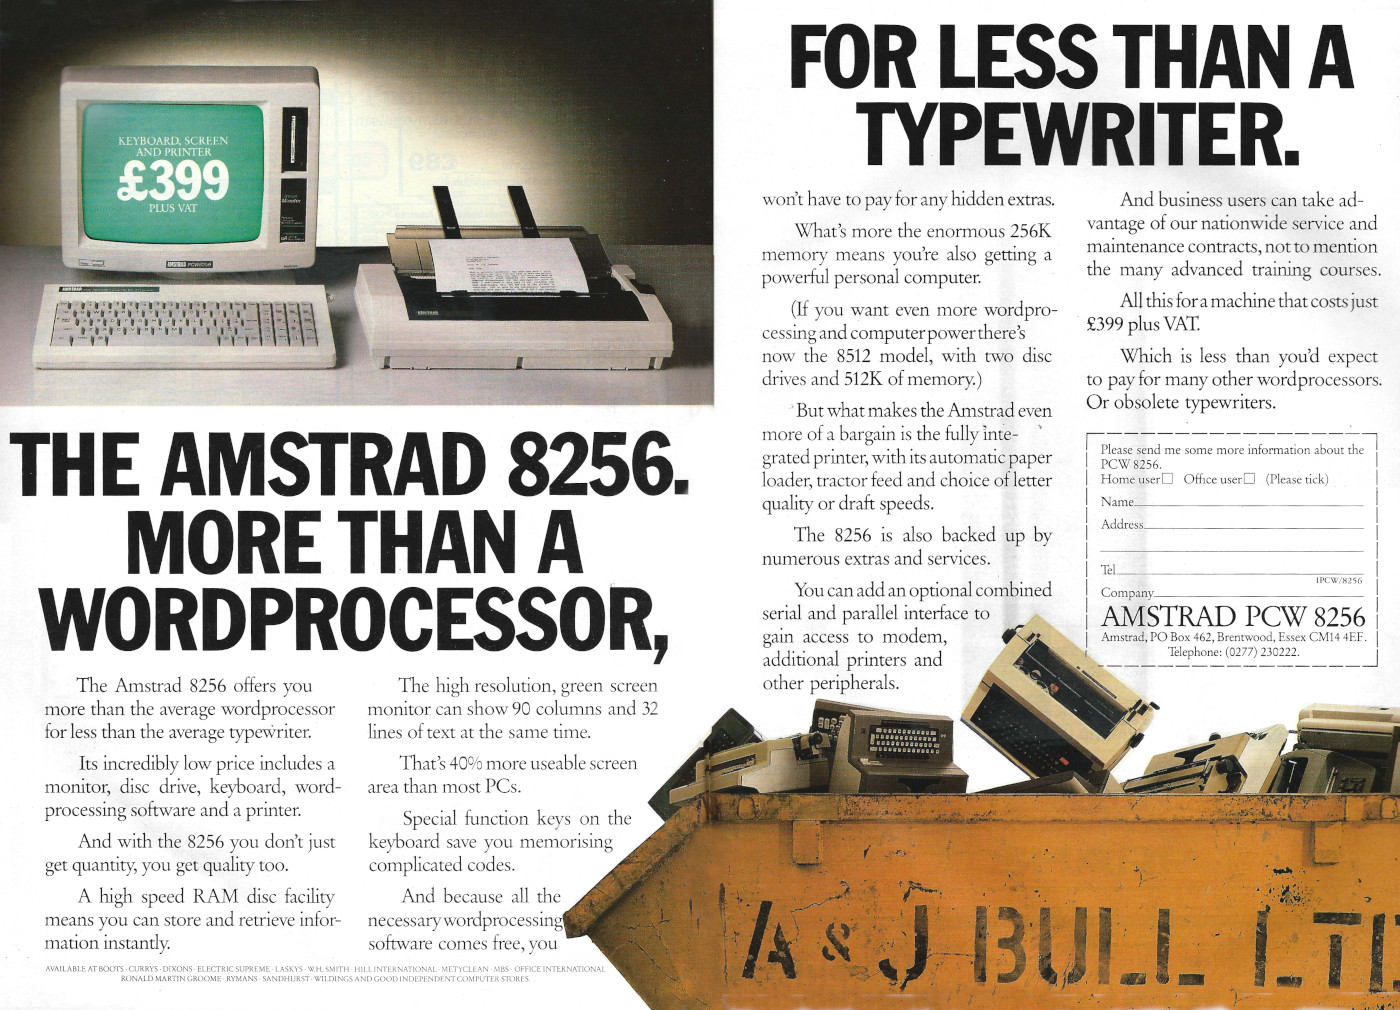 An advert for the PC‍W <span class='hilite'><span class='hilite'><span class='hilite'>8256</span></span></span> on a similar theme, with a skip full of junked computer equipment. From Personal Computer World, October 1986